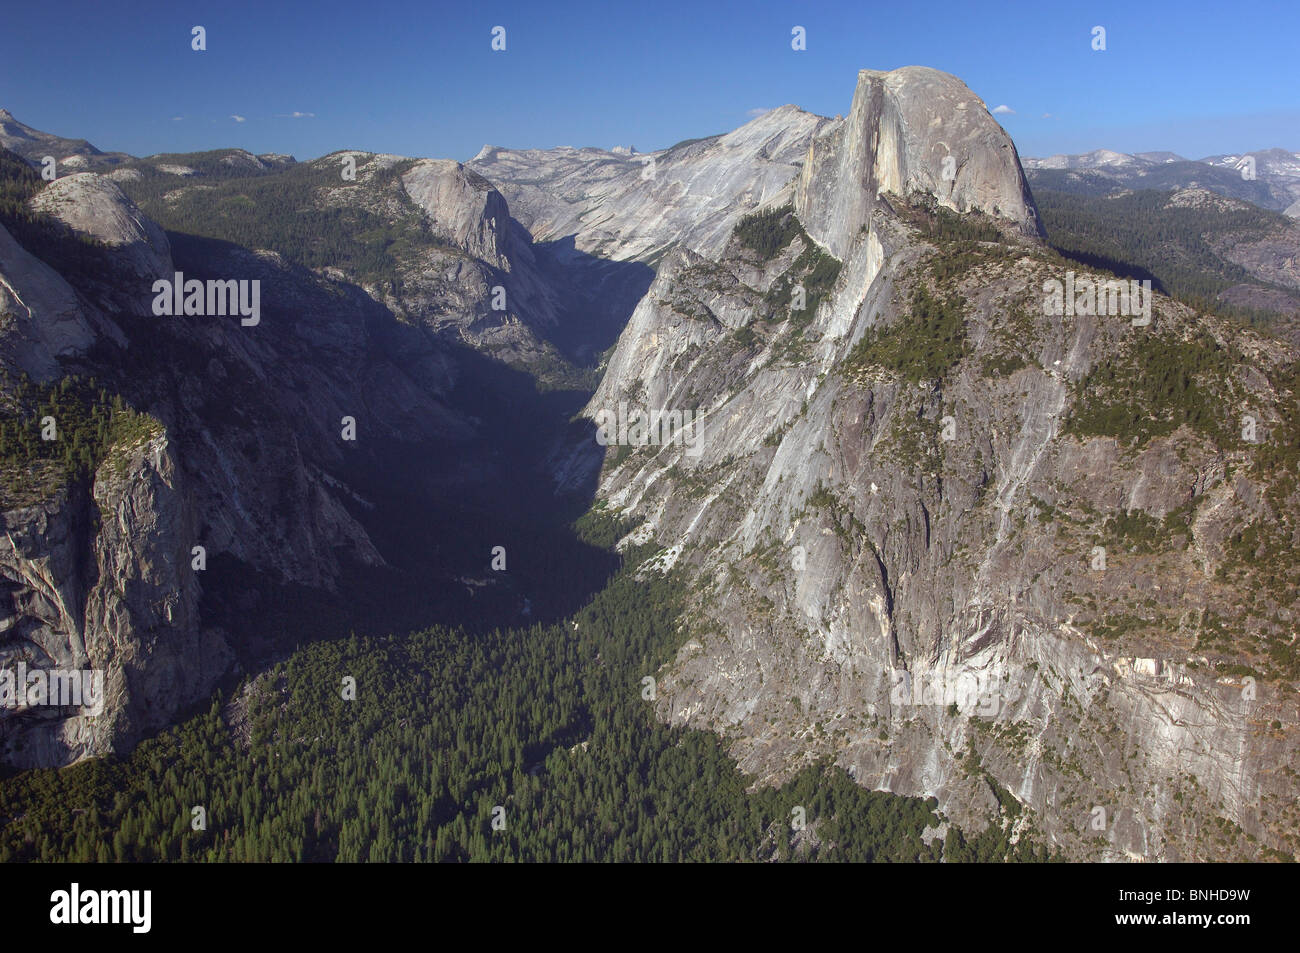 Usa California View From Glacier Point Half Dome And Yosemite Valley Yosemite National Park Nature Coniferous Forest Landscape Stock Photo